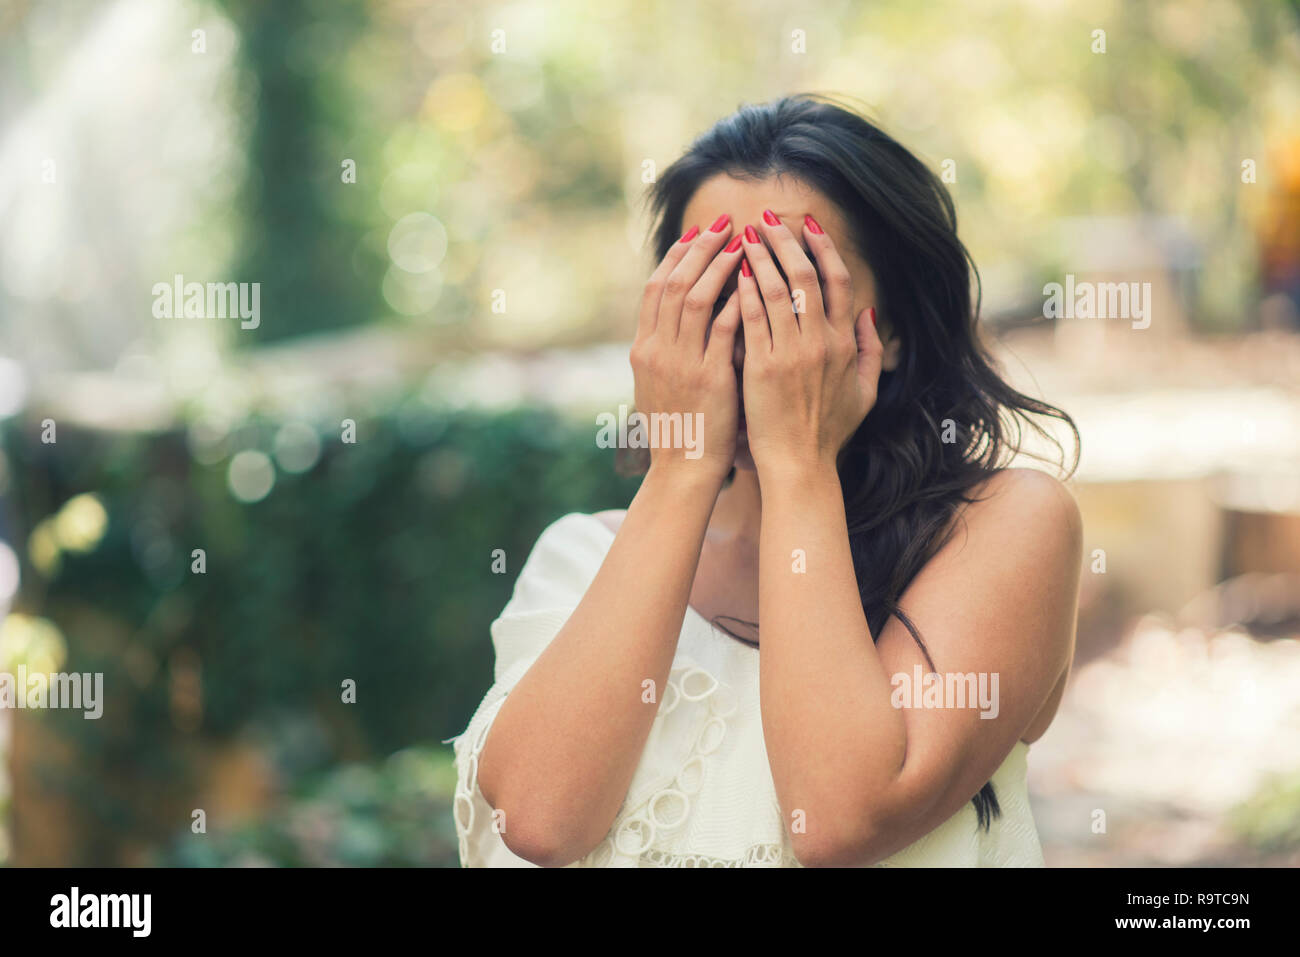 Young woman hands hiding face crying outdoors Stock Photo